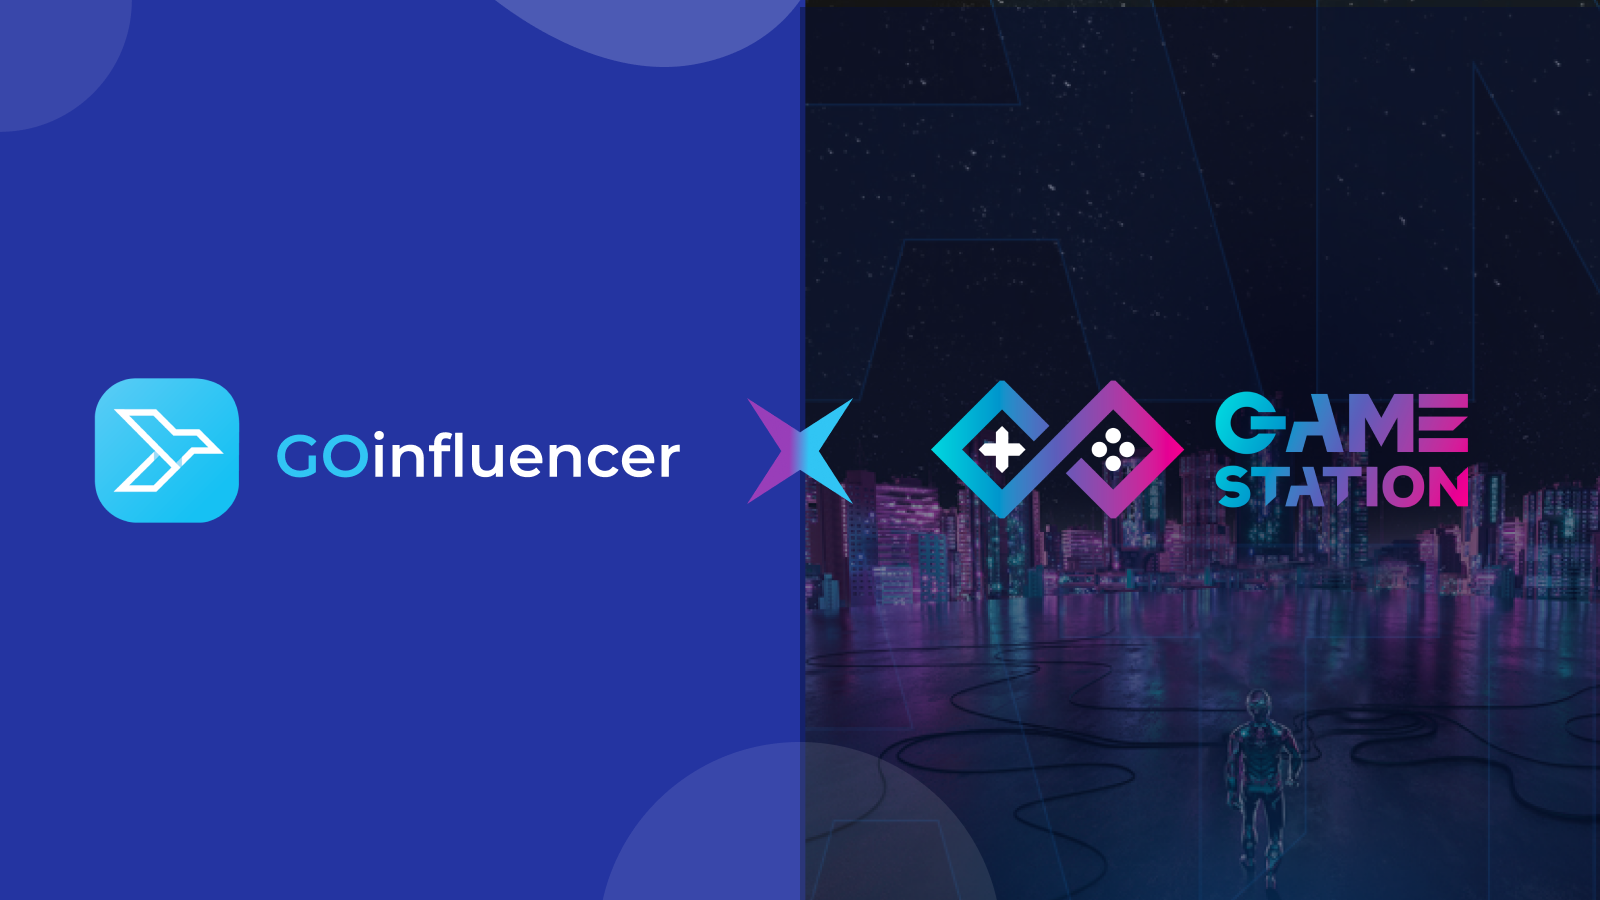 GOinfluencer Partnership Announcement with GameStation